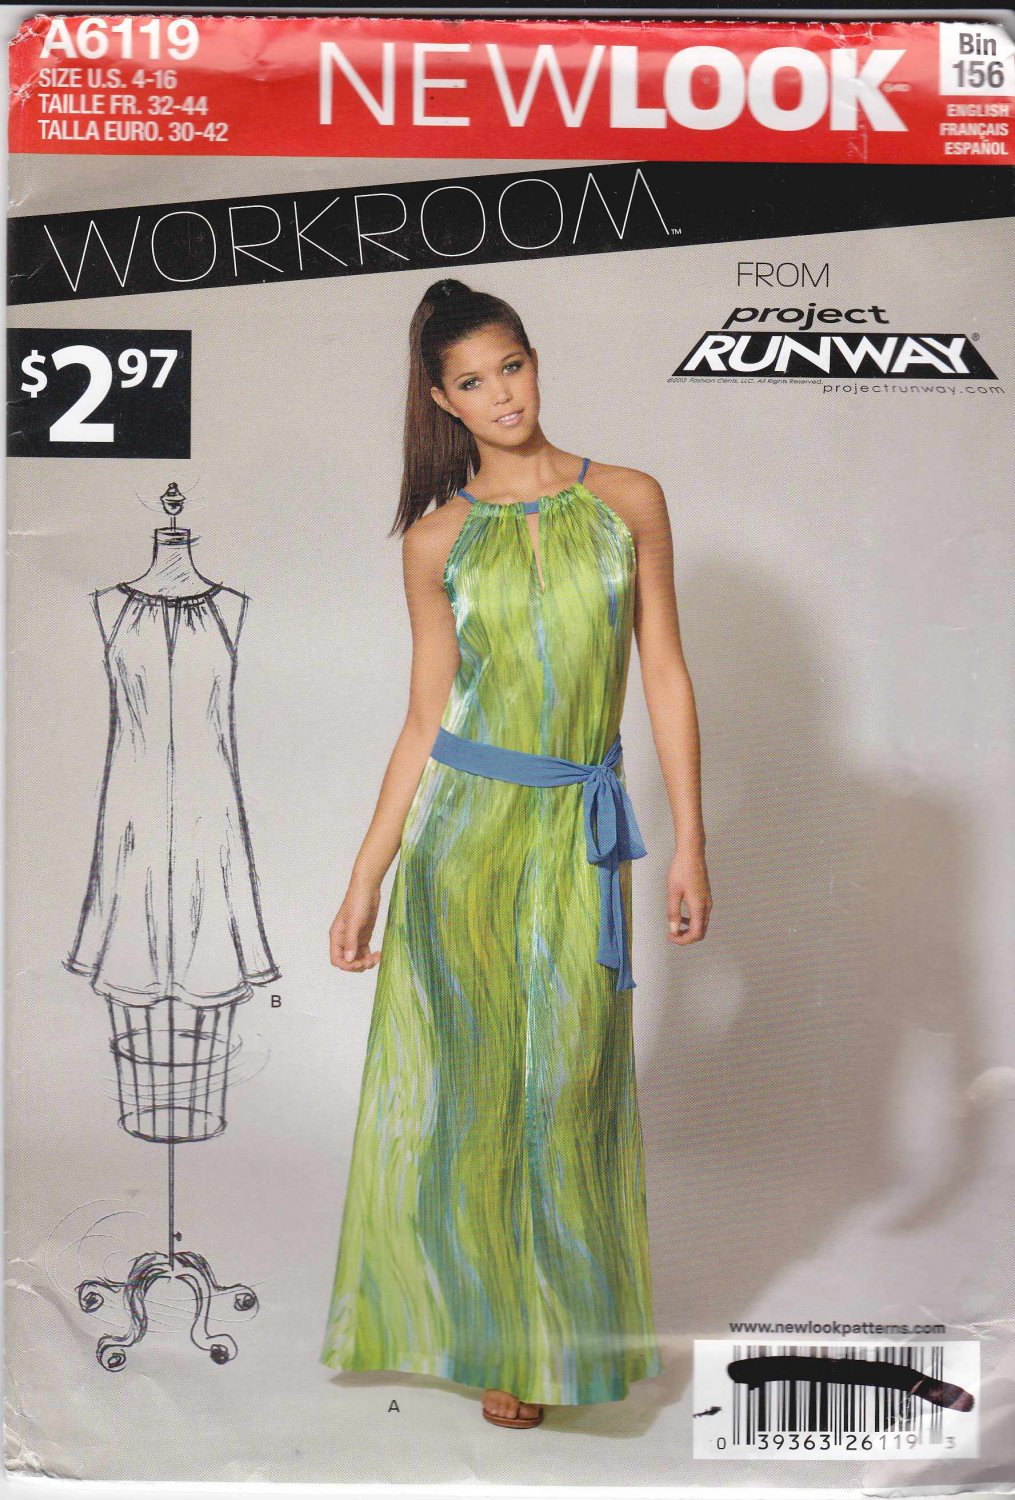 New Look Sewing Pattern 6119 Misses Size 4-16 Project Runway Workroom ...